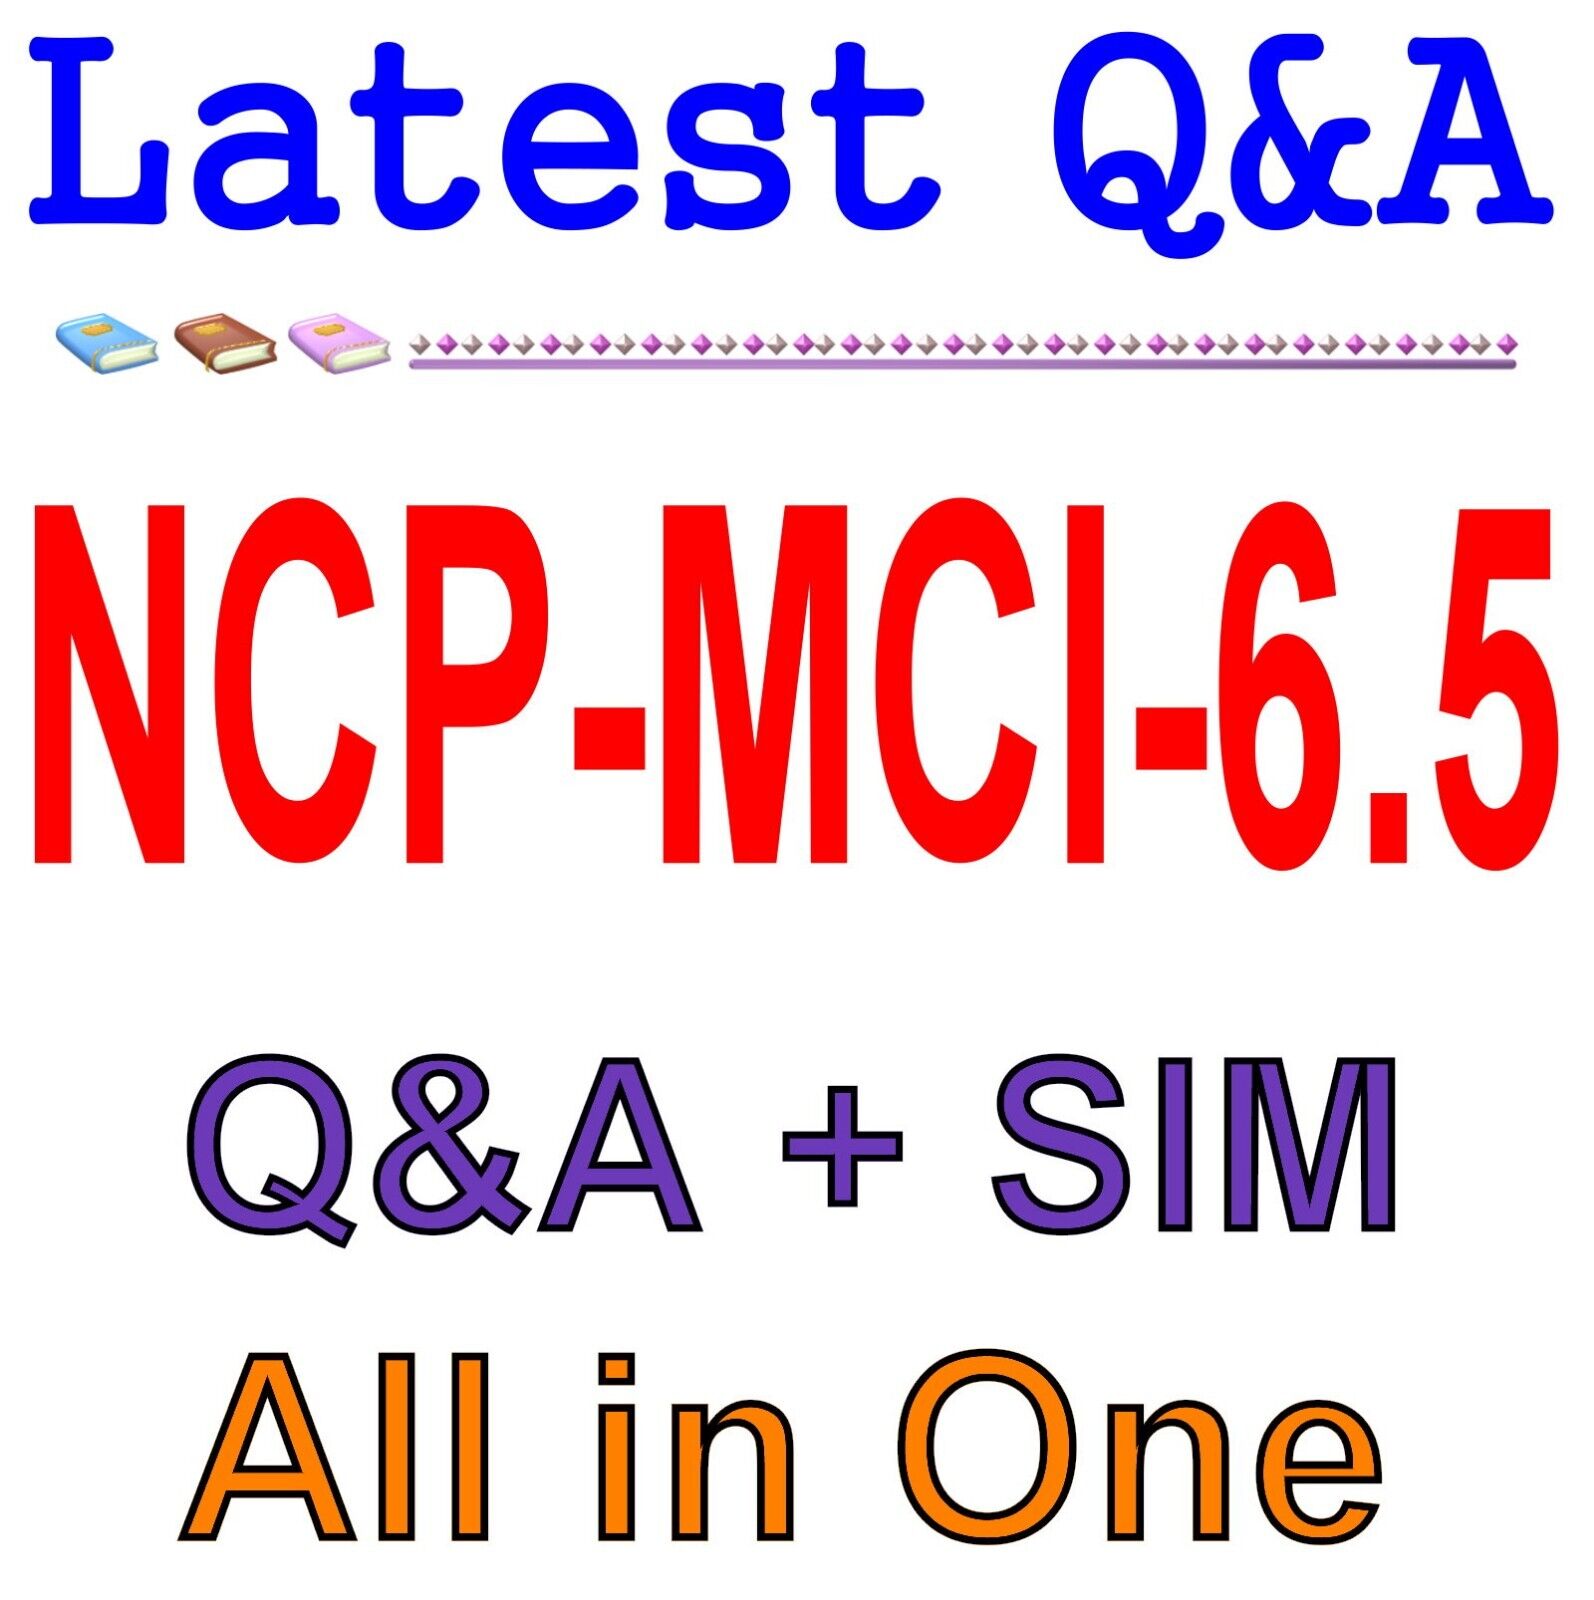 Nutanix Certified Professional-Multicloud Infrastructure NCP-MCI-6.5 Exam Q&A